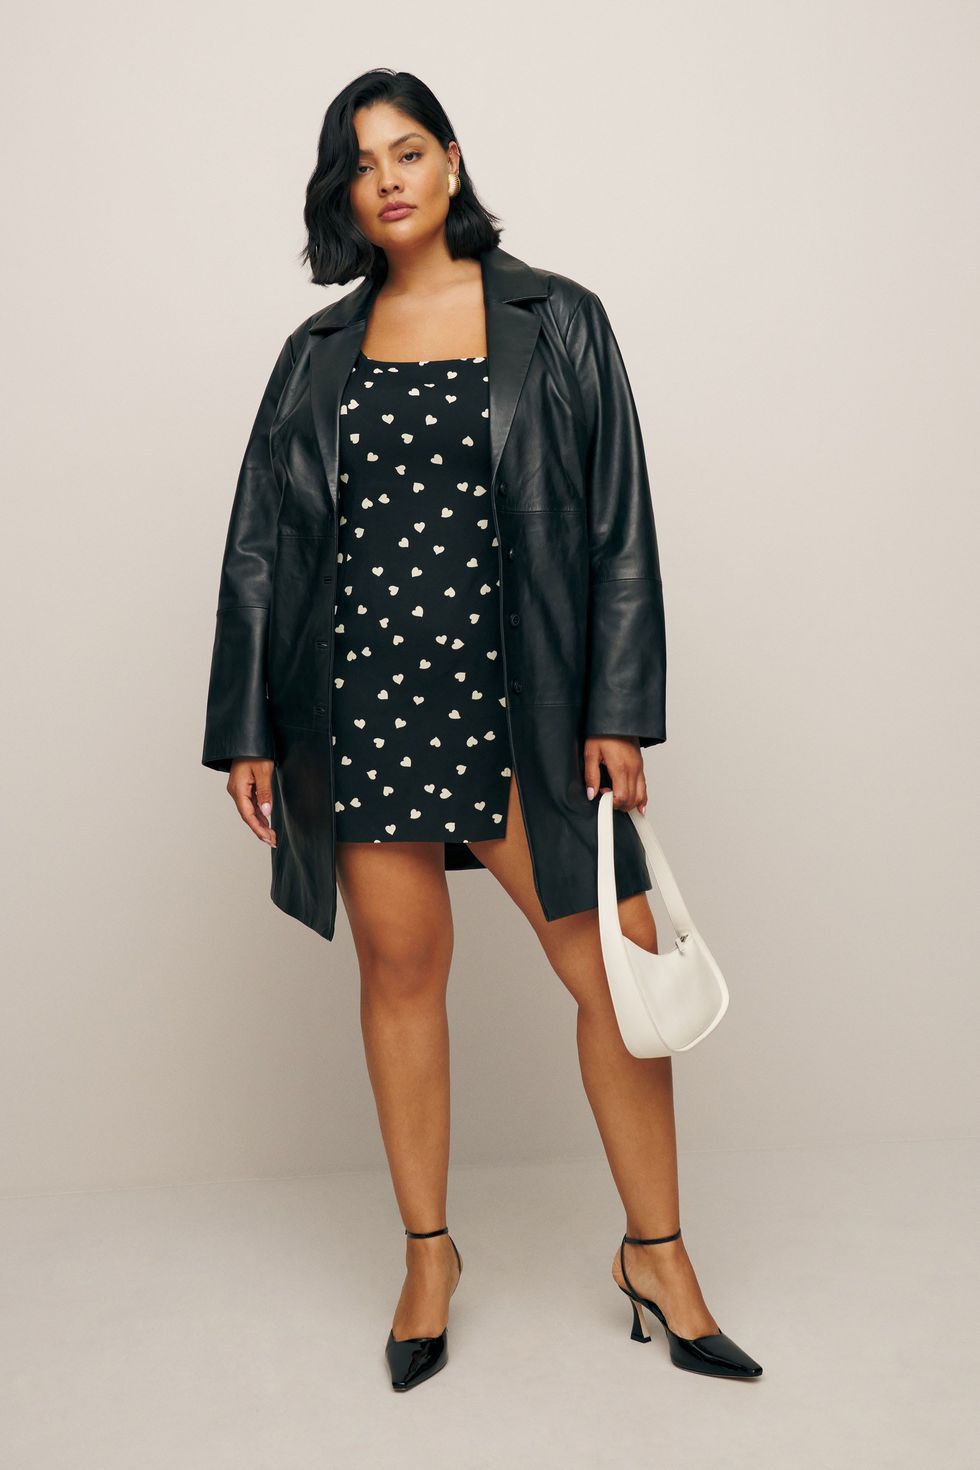 Final Sale Plus Size Faux Leather Jacket in Black with Silver